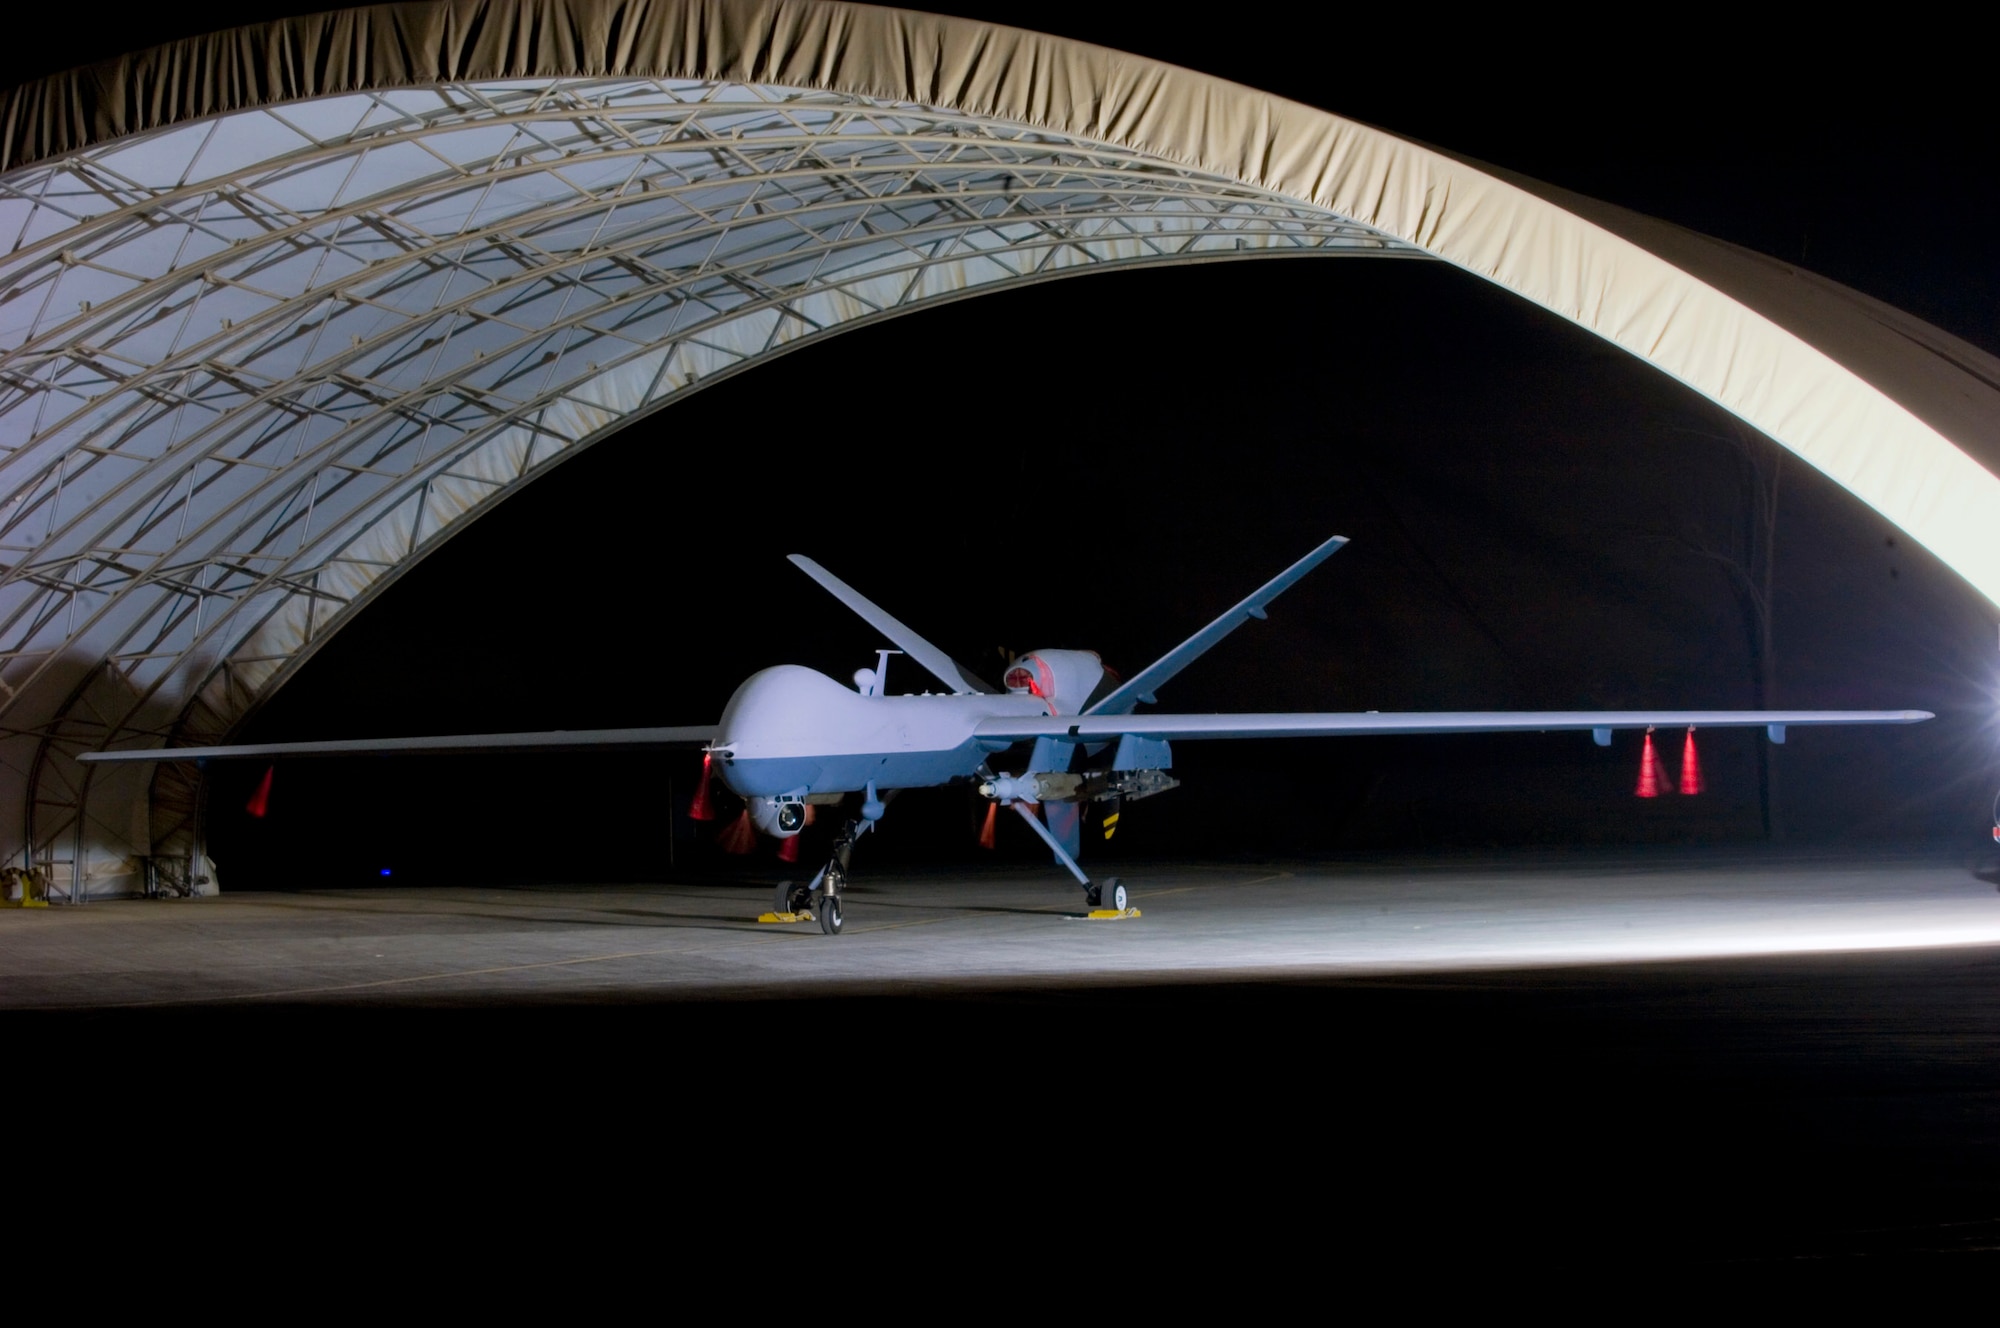 An armed MQ-9 Reaper unmanned aircraft sits in a shelter Oct. 15 at Joint Base Balad, Iraq, before a mission. Larger and more powerful than the MQ-1 Predator, the Reaper can carry up to 3,750 pounds of laser-guided bombs and Hellfire missiles. (U.S. Air Force photo/Tech. Sgt. Erik Gudmundson) 
